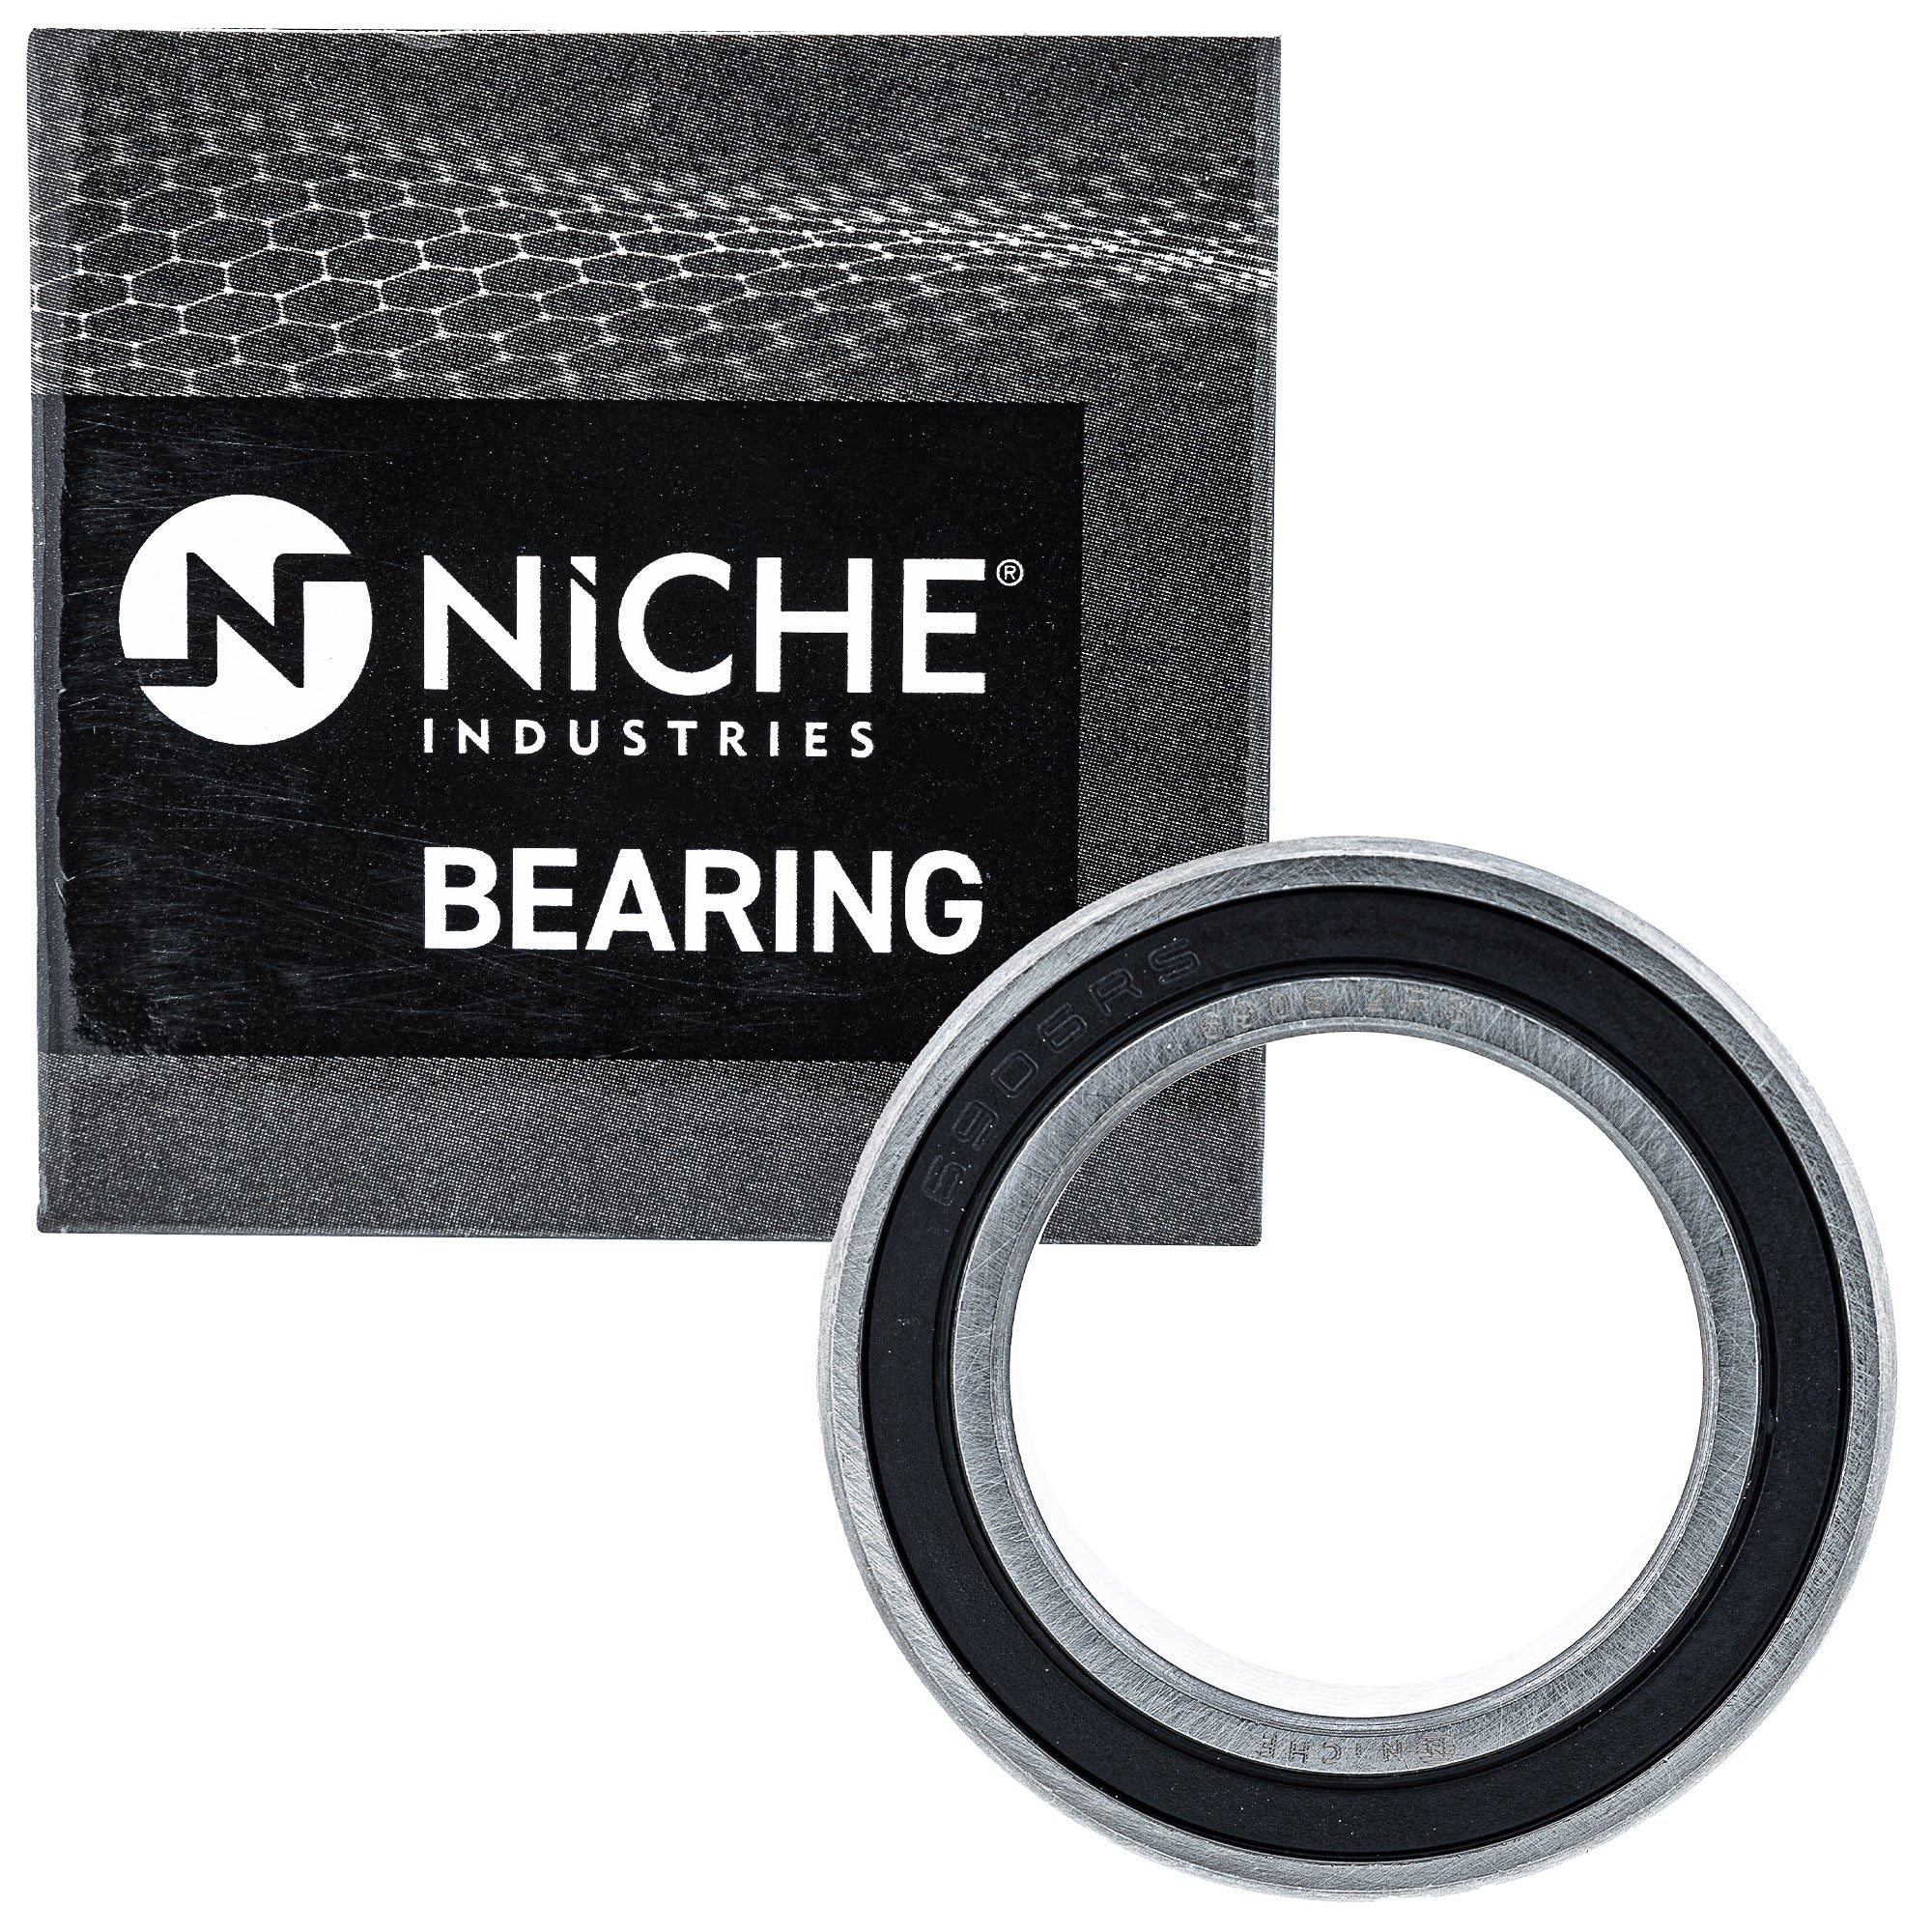 NICHE MK1009162 Wheel Bearing Seal Kit for zOTHER Xtrainer